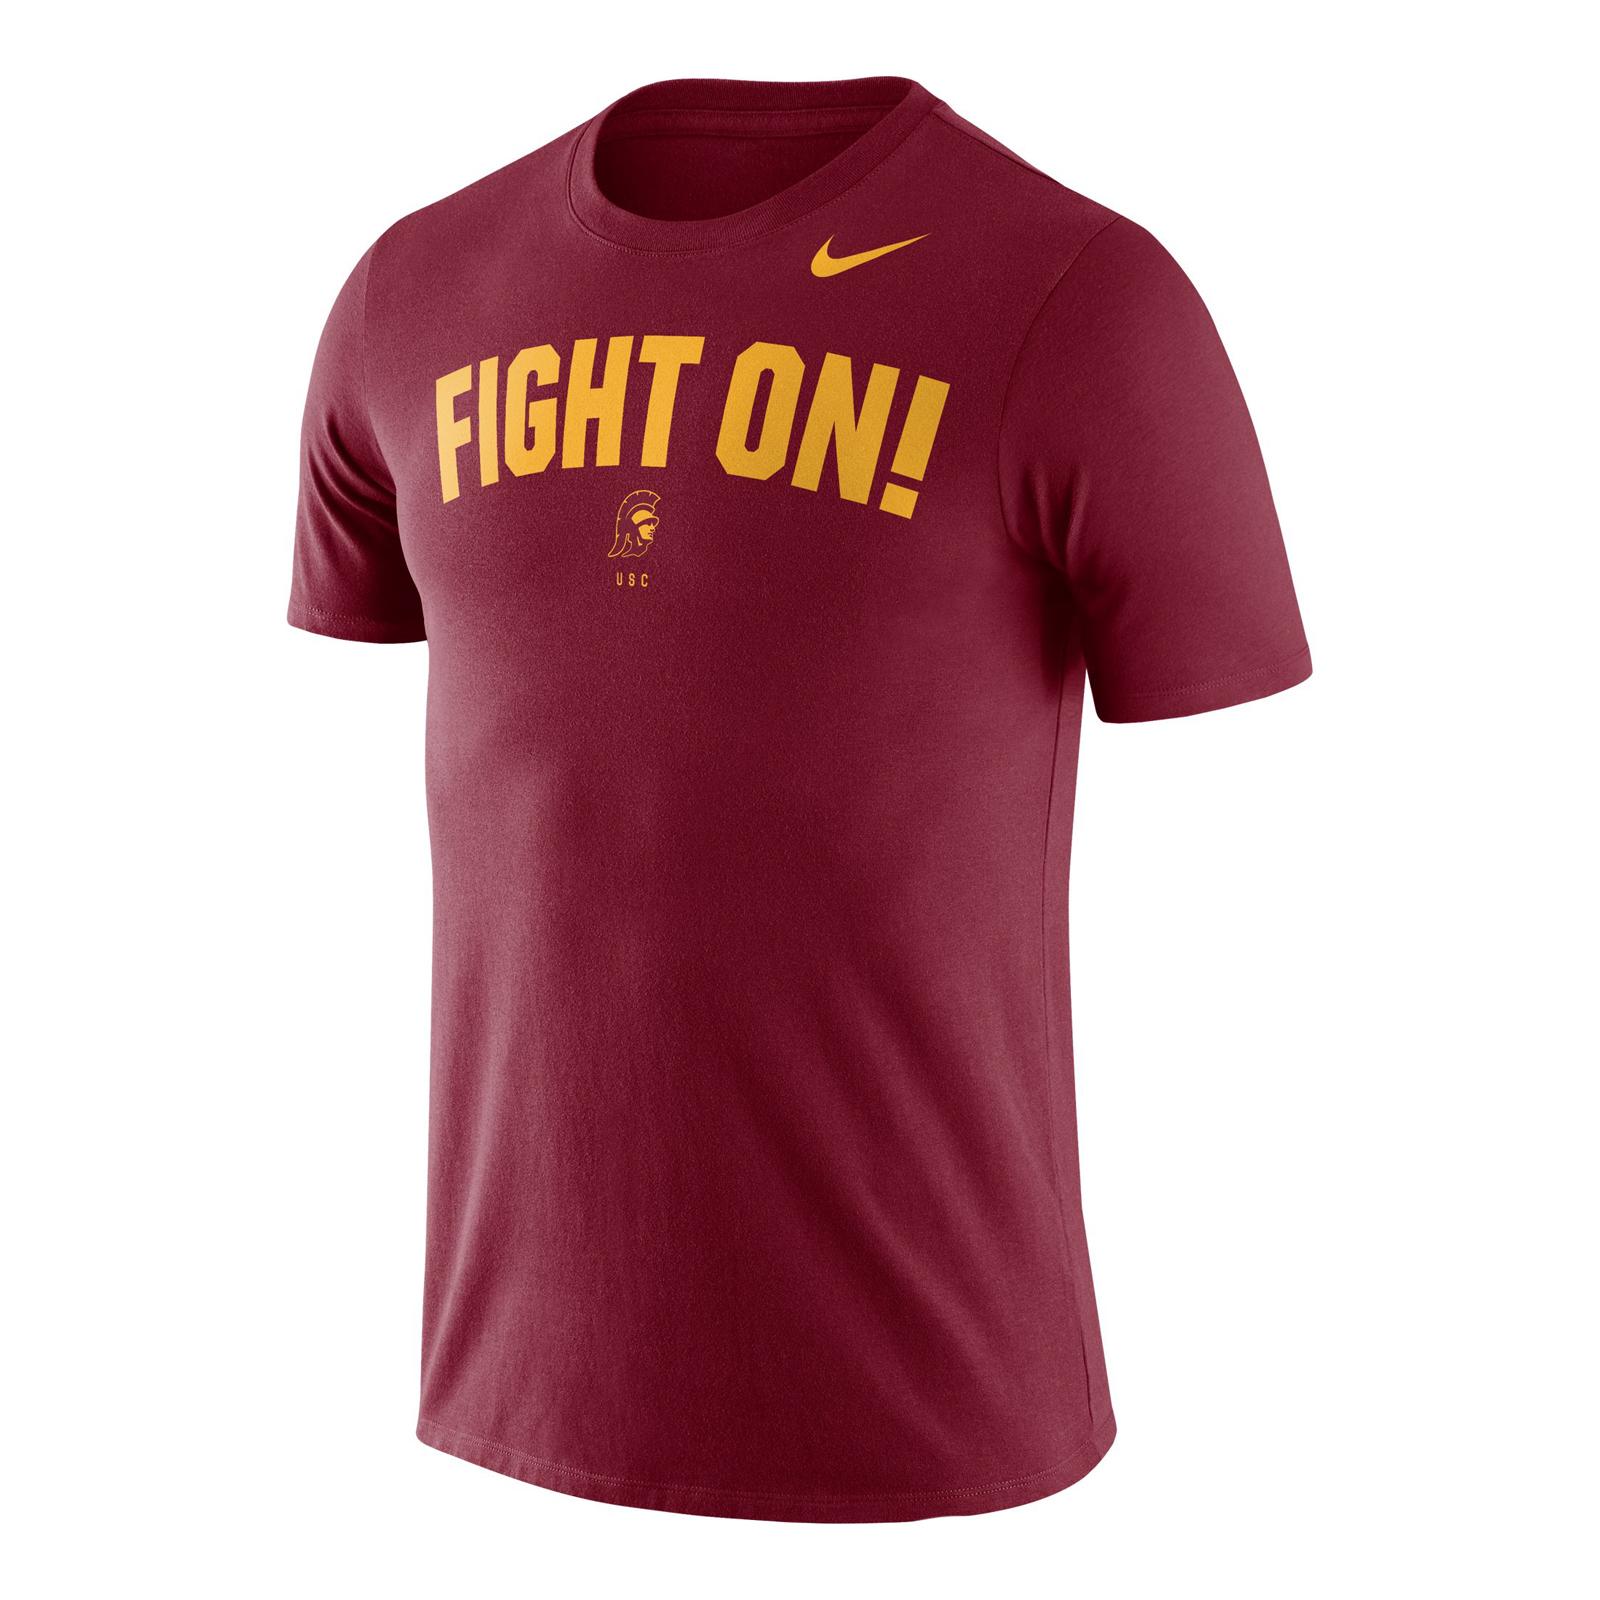 Fight On! Mens Dri-FIT Cotton Phrase SS Tee image21